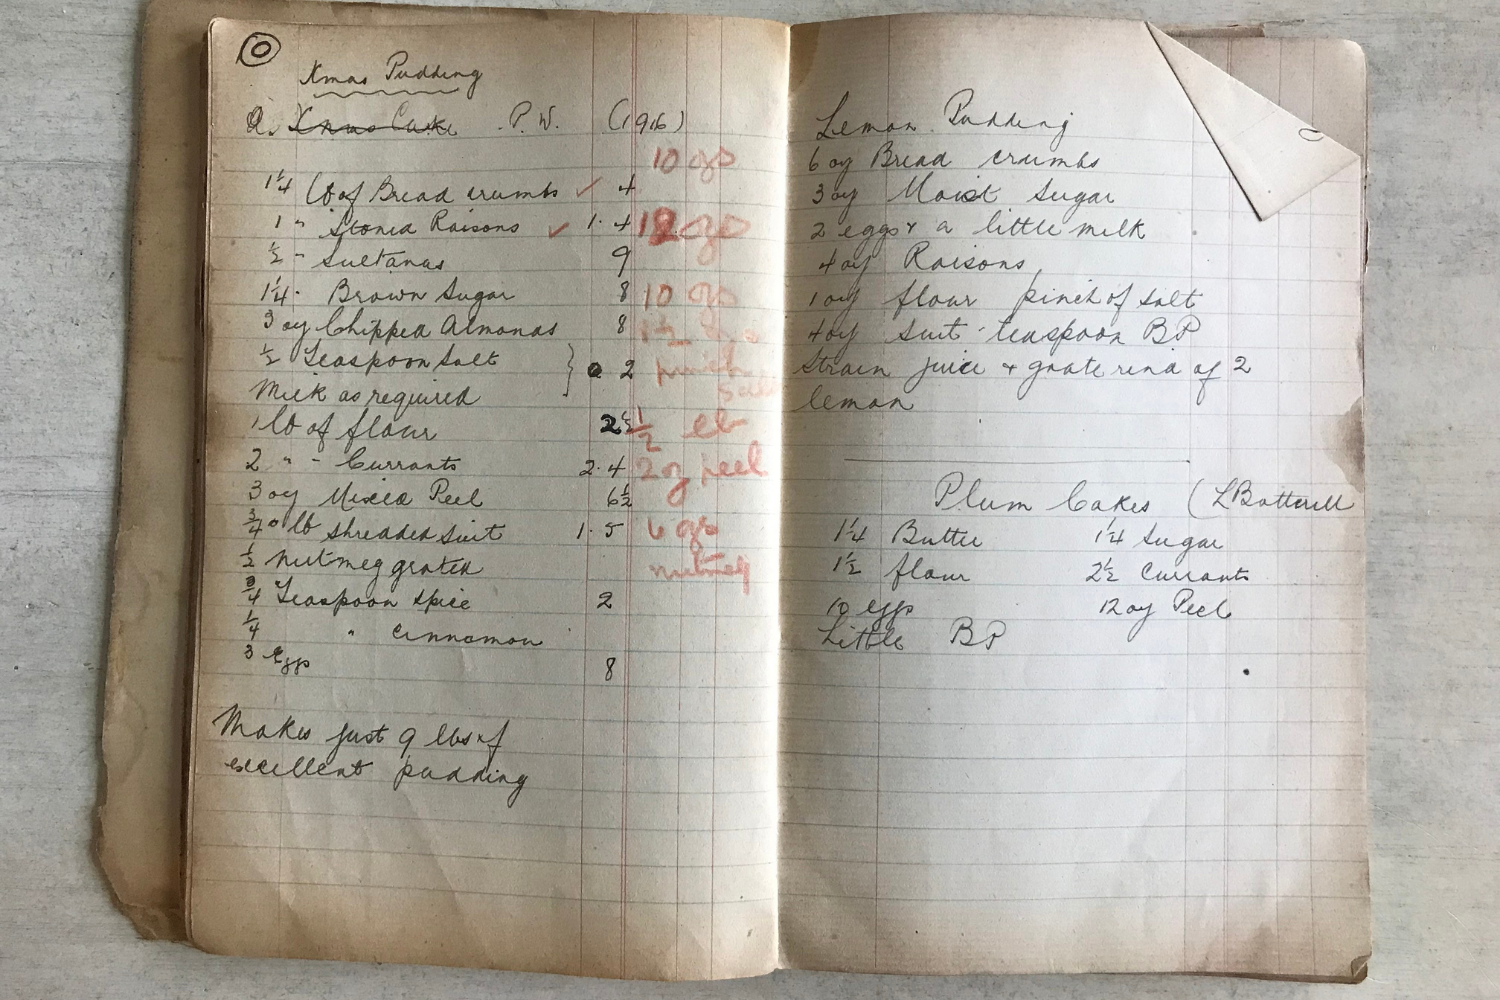 A handwritten recipe book lays open flat on a white table, showing both left and right pages of the book. The cursive text is written in thin black ink. On the lefthand page is a recipe for Xmas pudding. On the righthand page, is a recipe for lemon pudding at the top and plum cakes at the bottom.